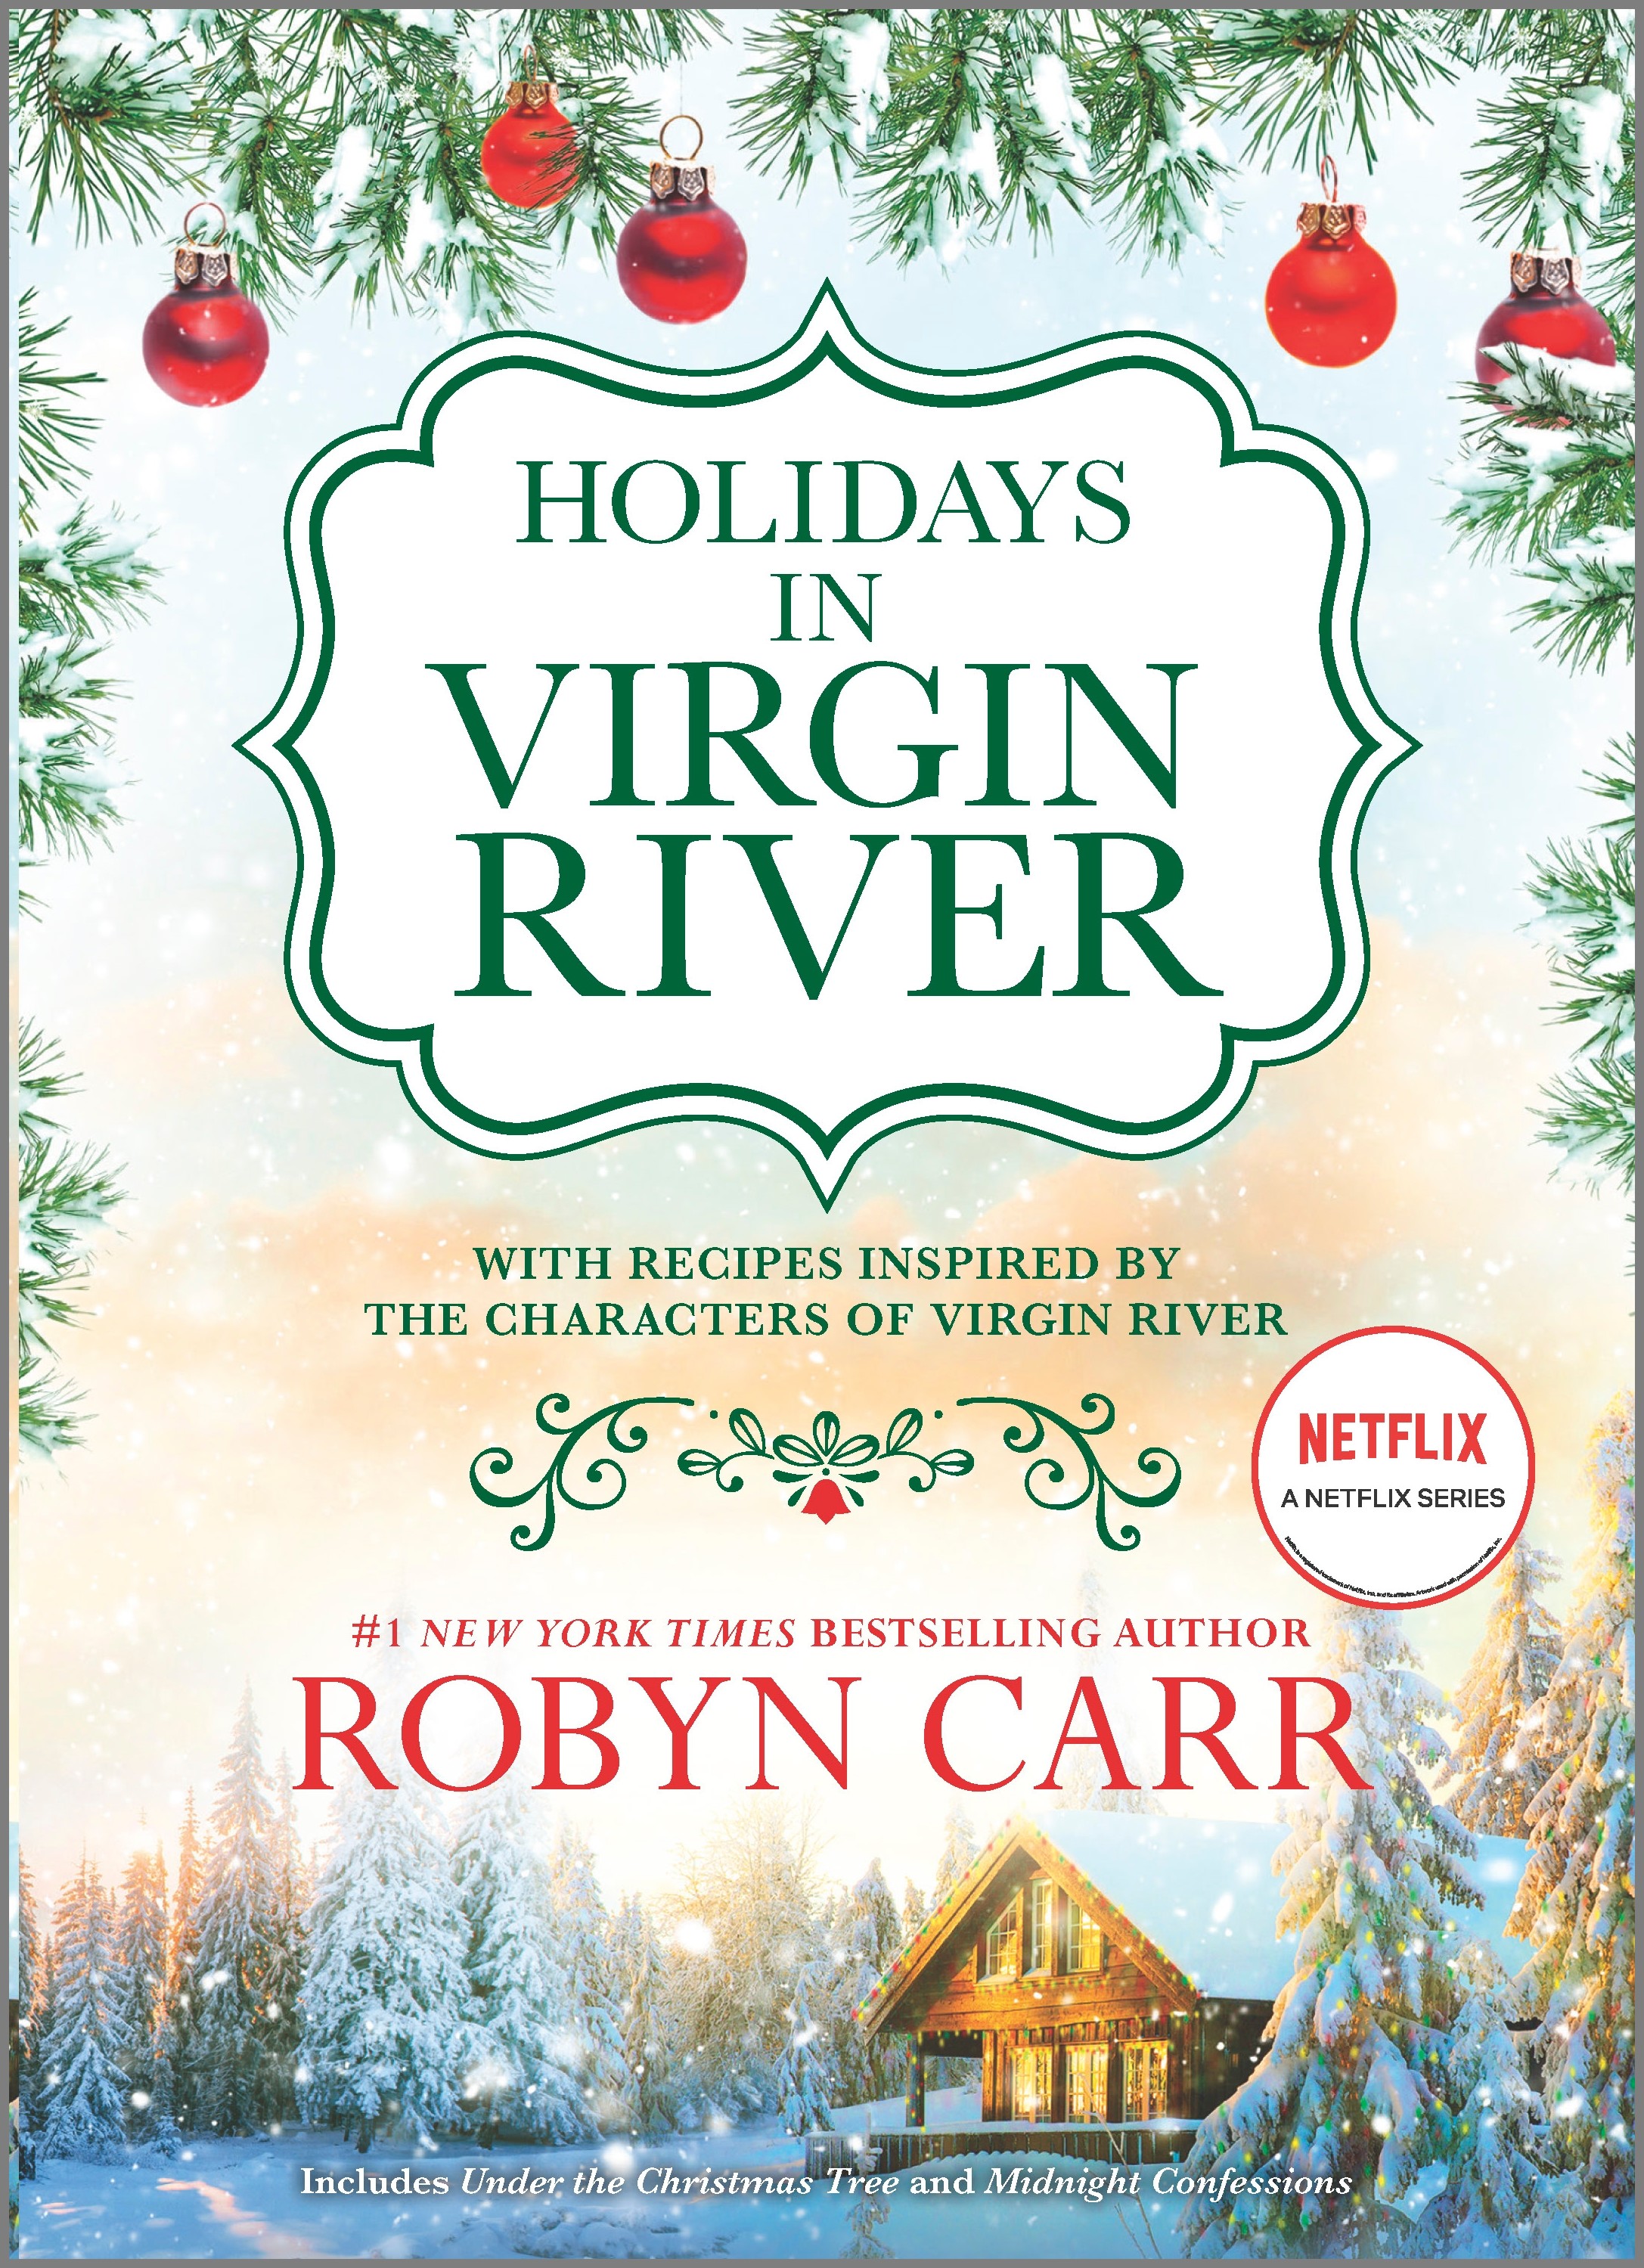 Holidays in Virgin River : Romance Stories for the Holidays | Carr, Robyn